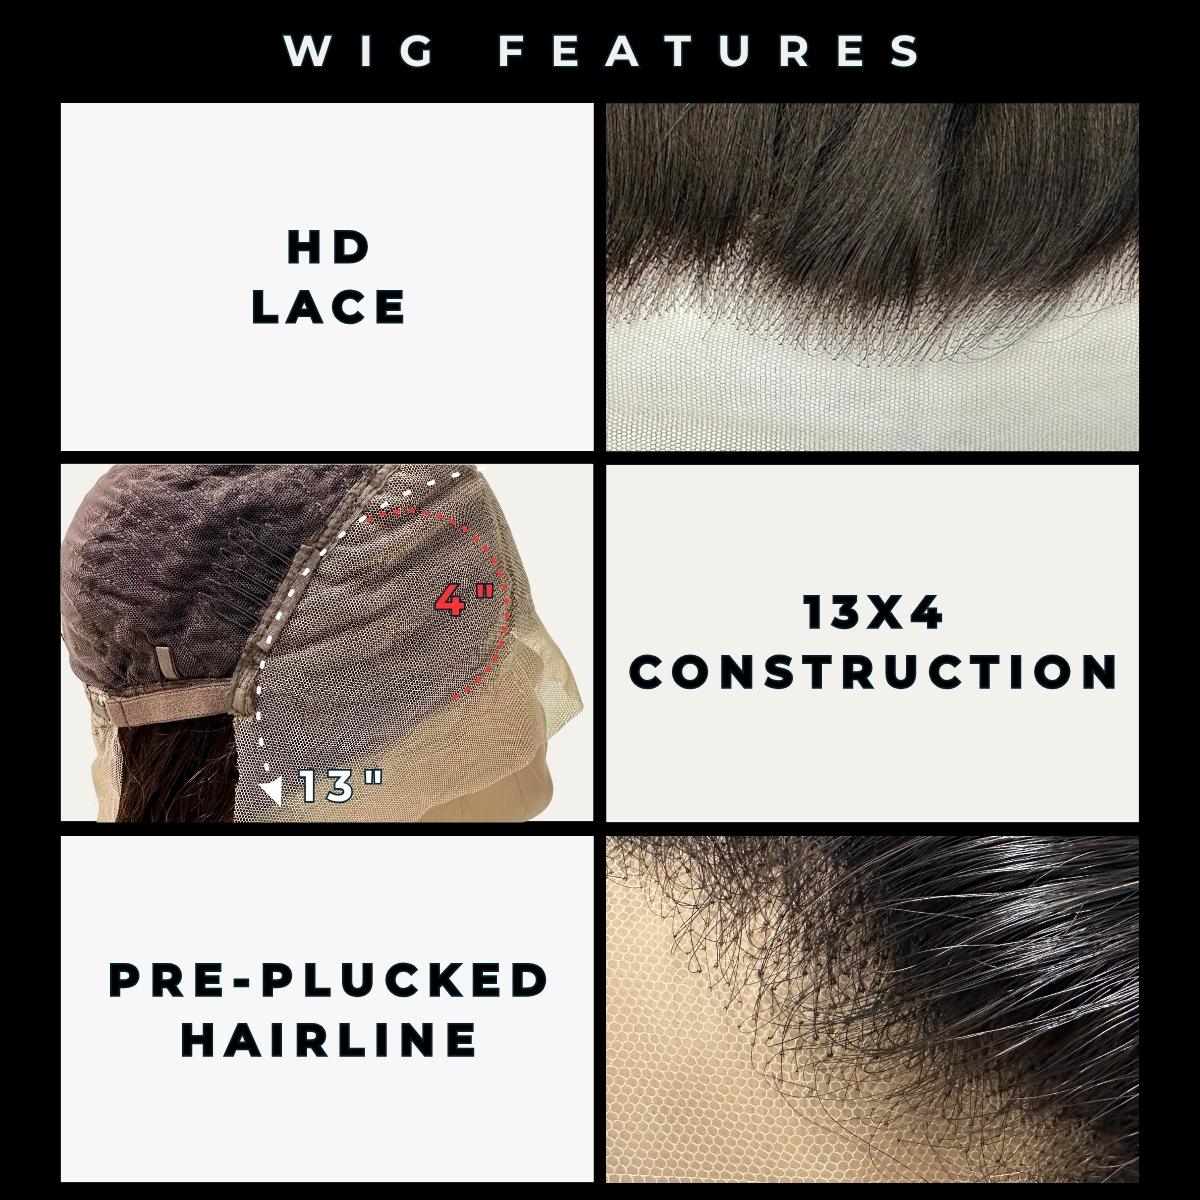 wic cap features-hd lace-13x4- pre plucked hairline